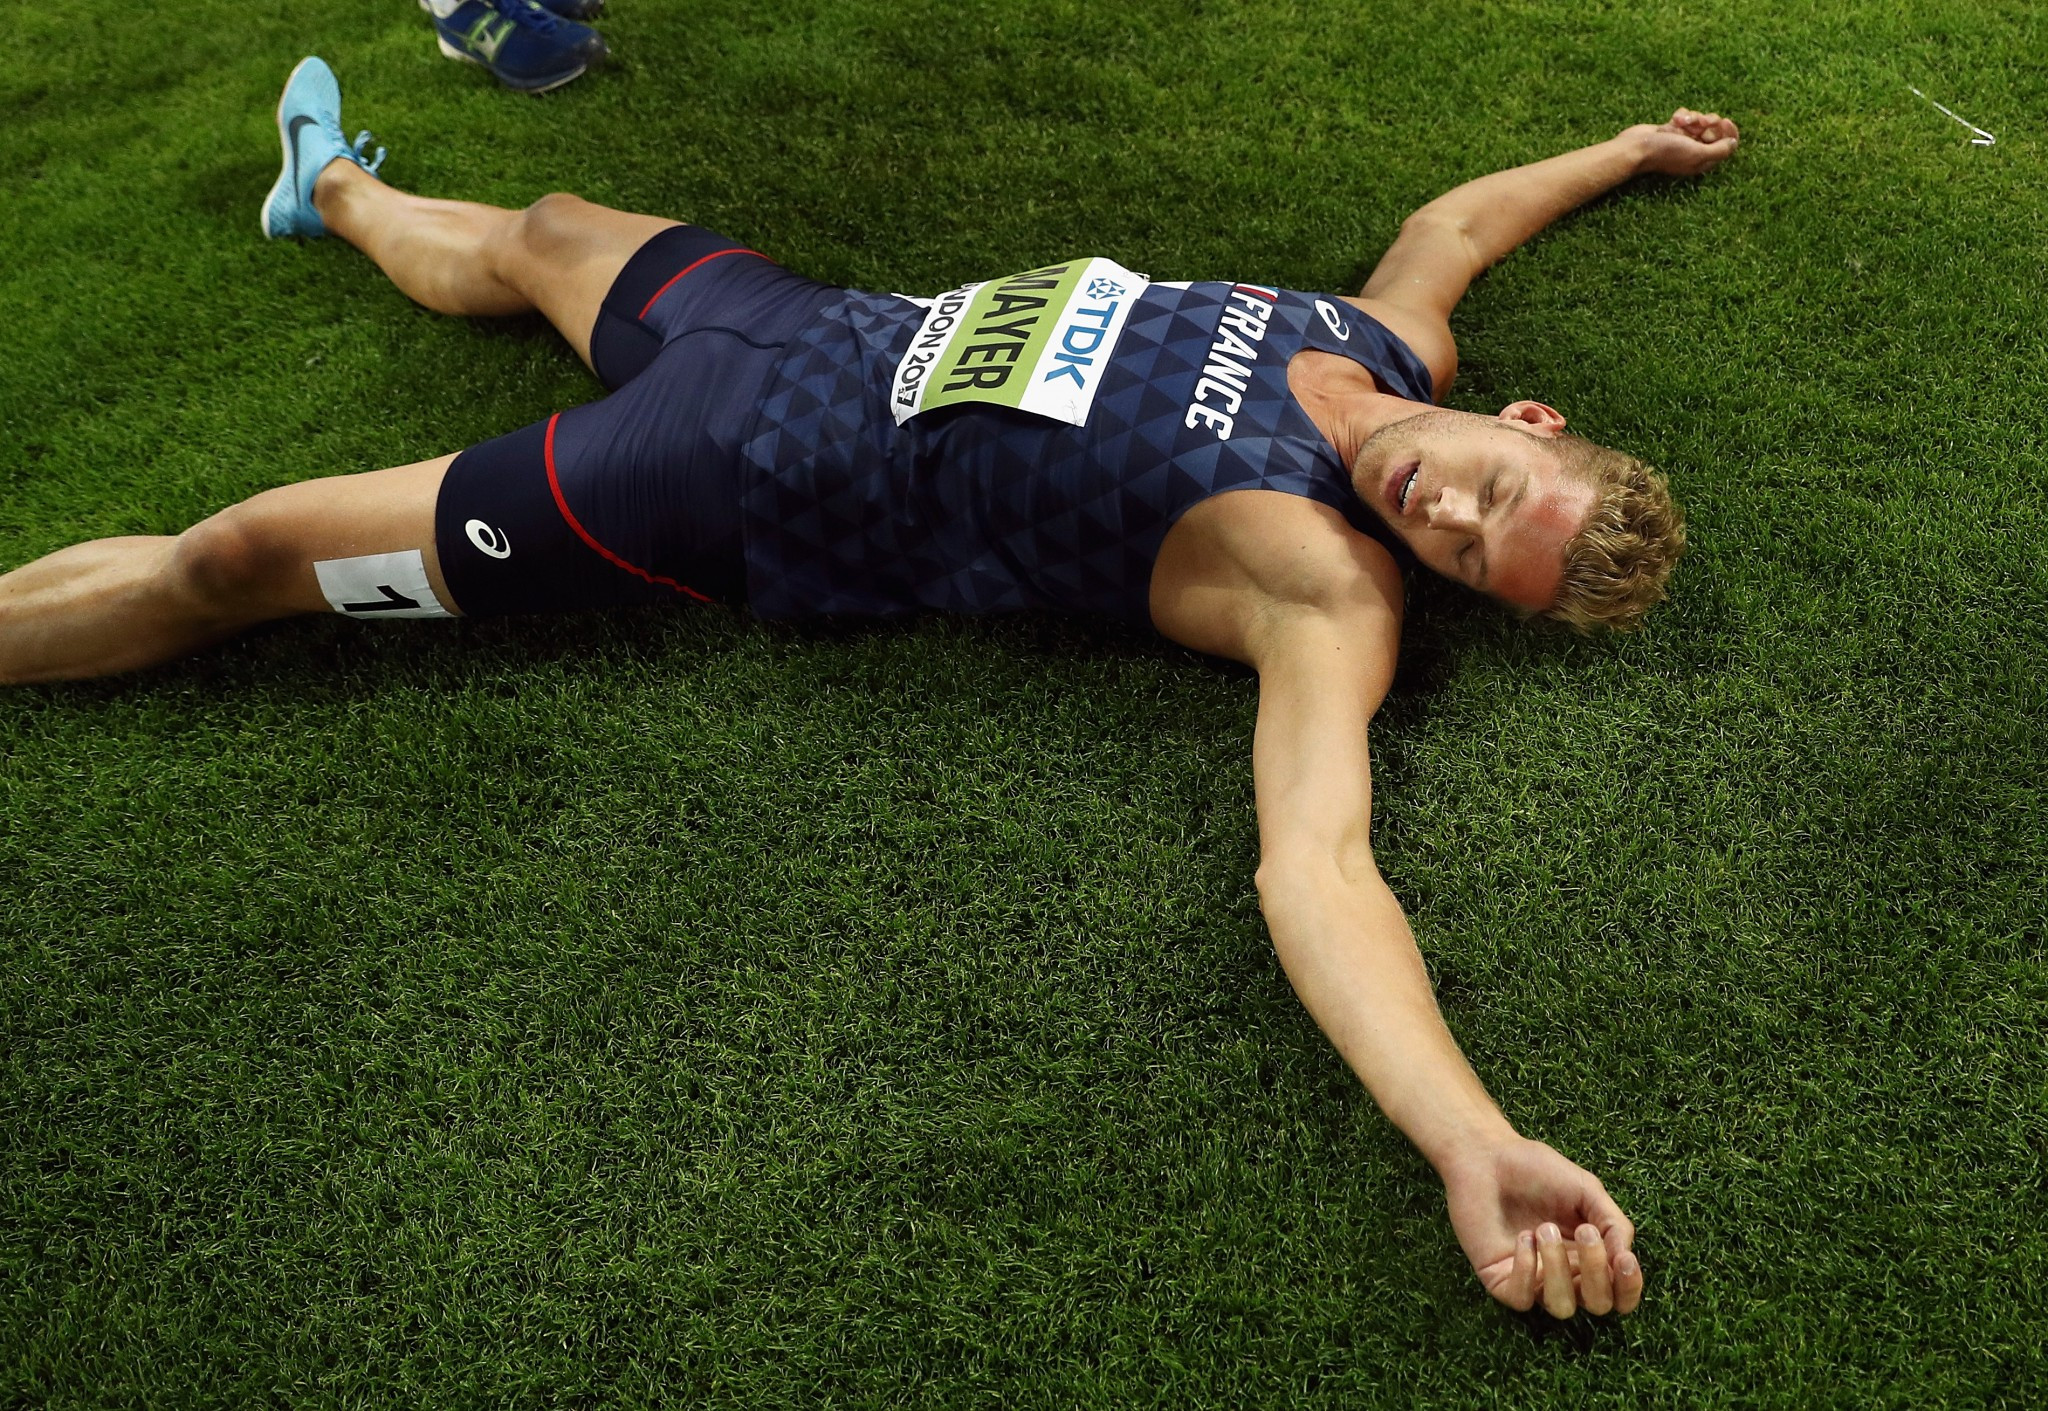 France's Kevin Mayer, flat out after winning the world decathlon title ©Getty Images